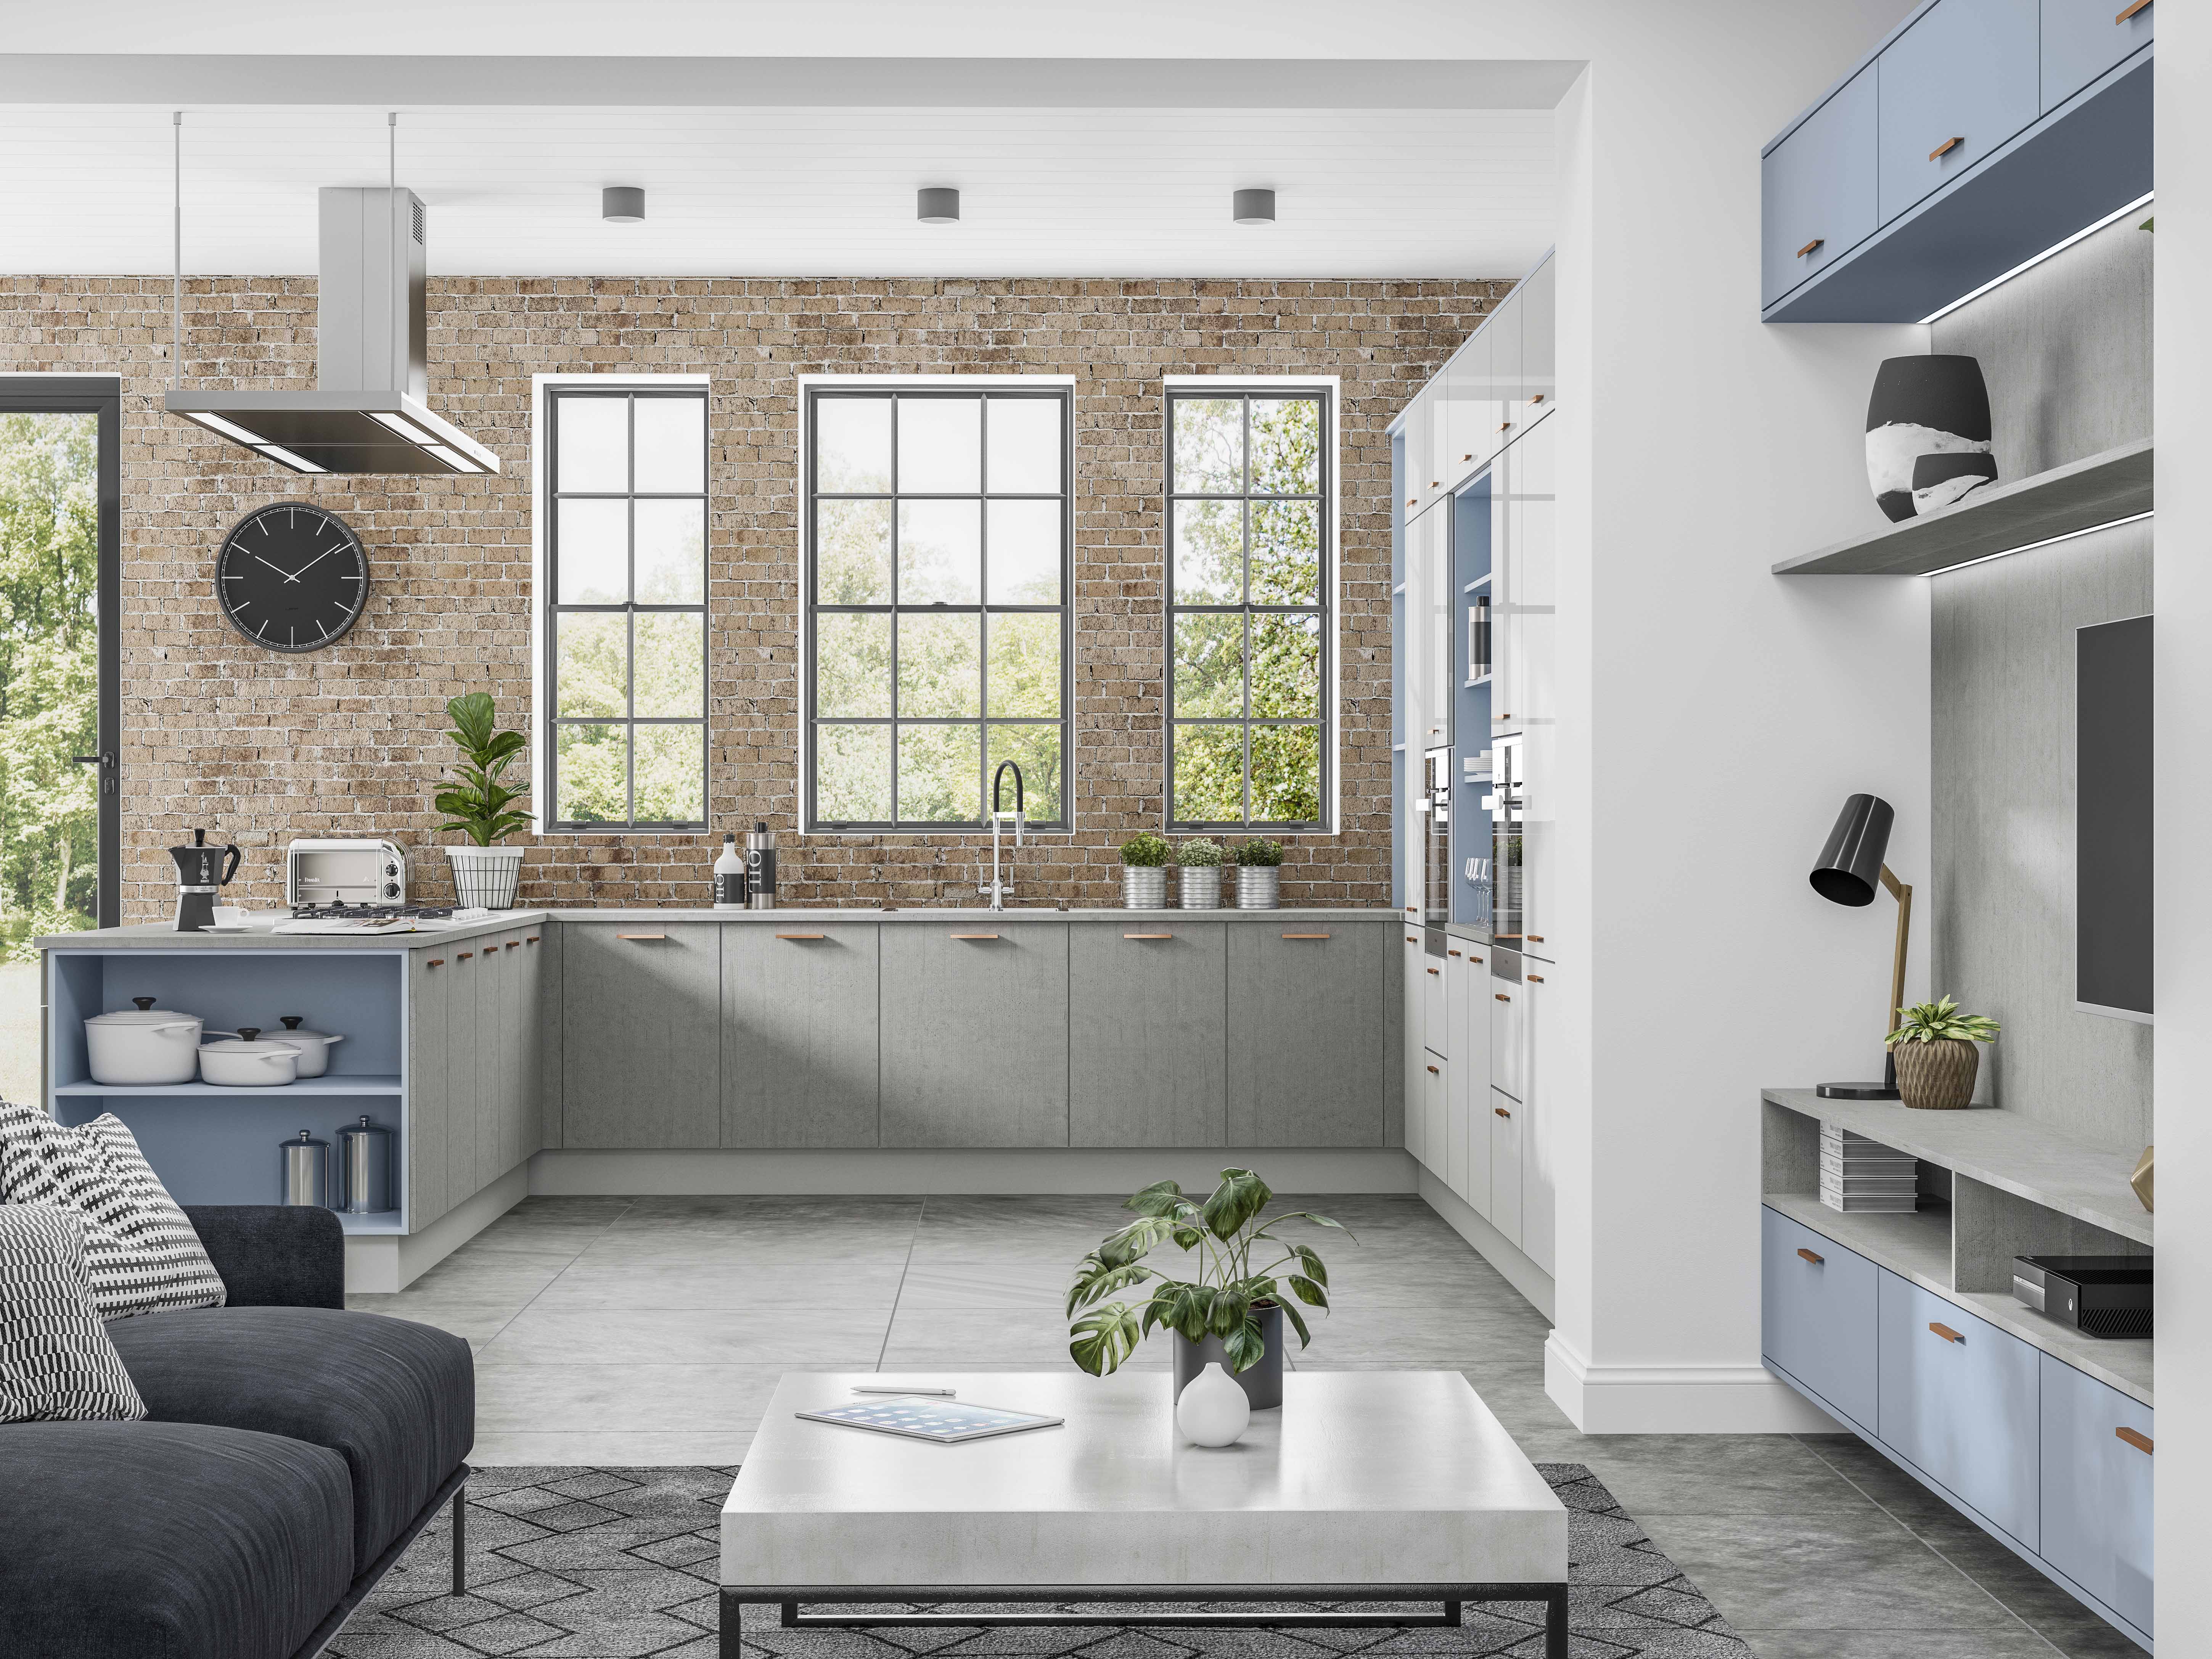 grey and brick kitchen and living room space